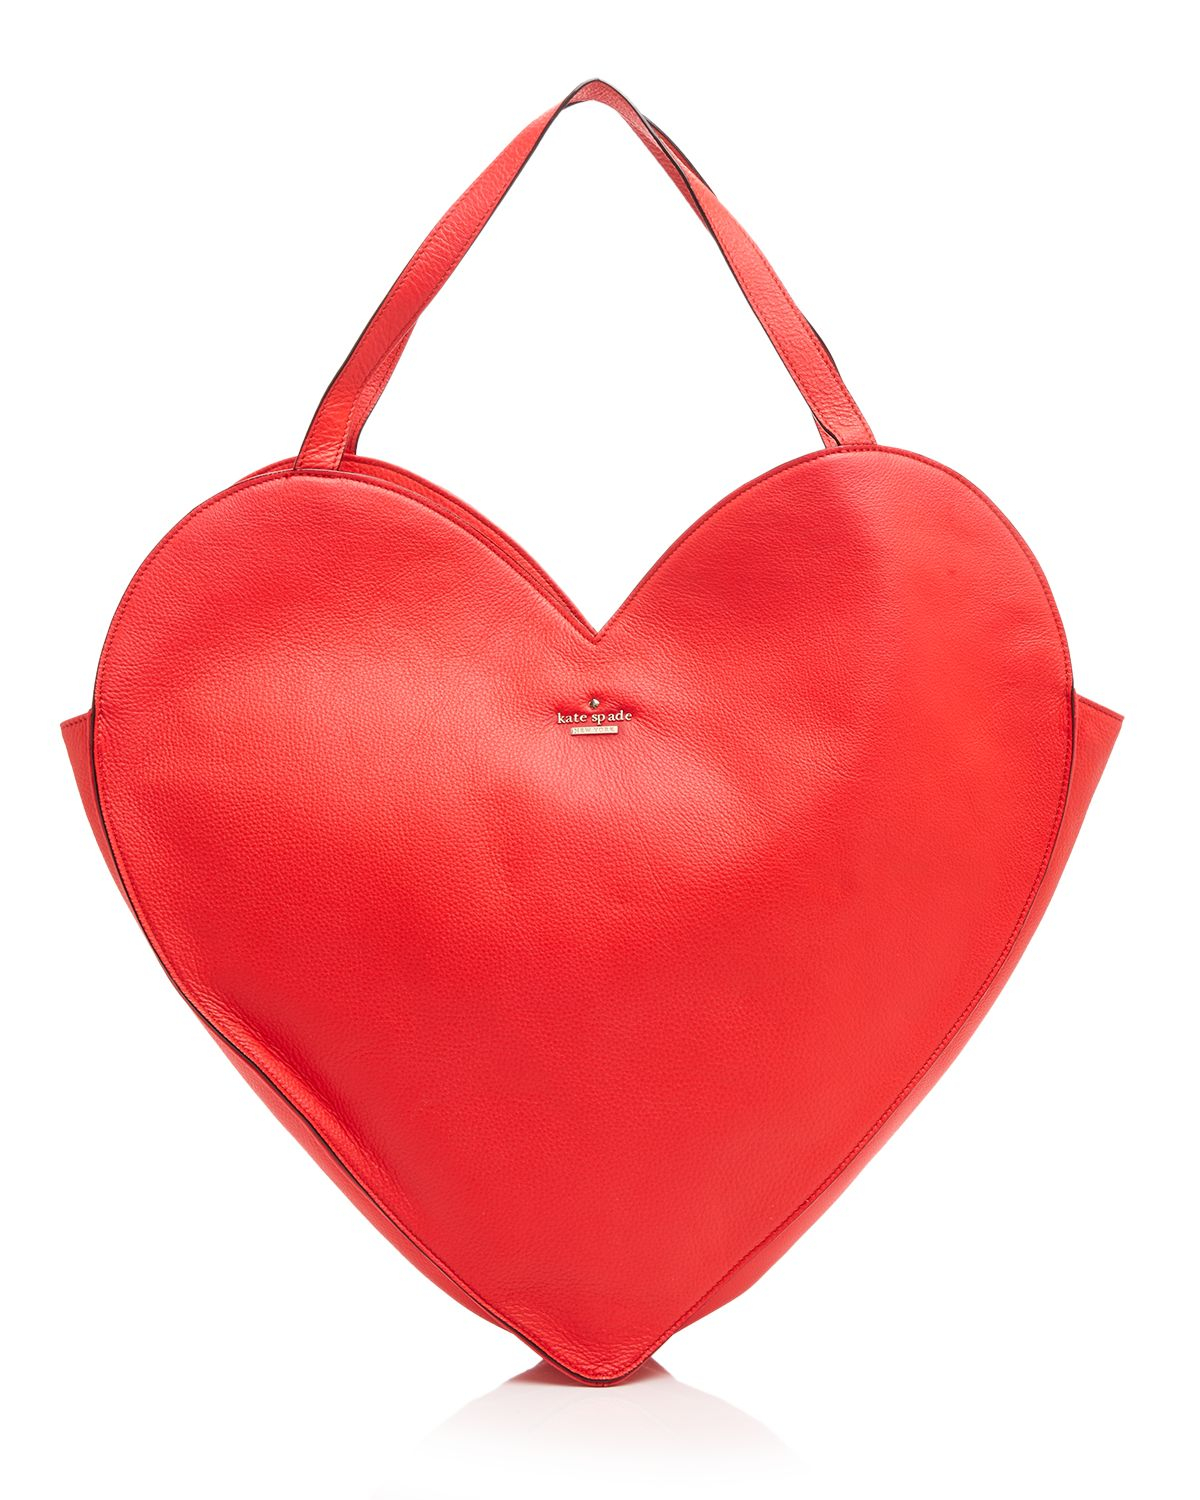 Lyst - Kate Spade New York Tote - Love Birds Heart in Red